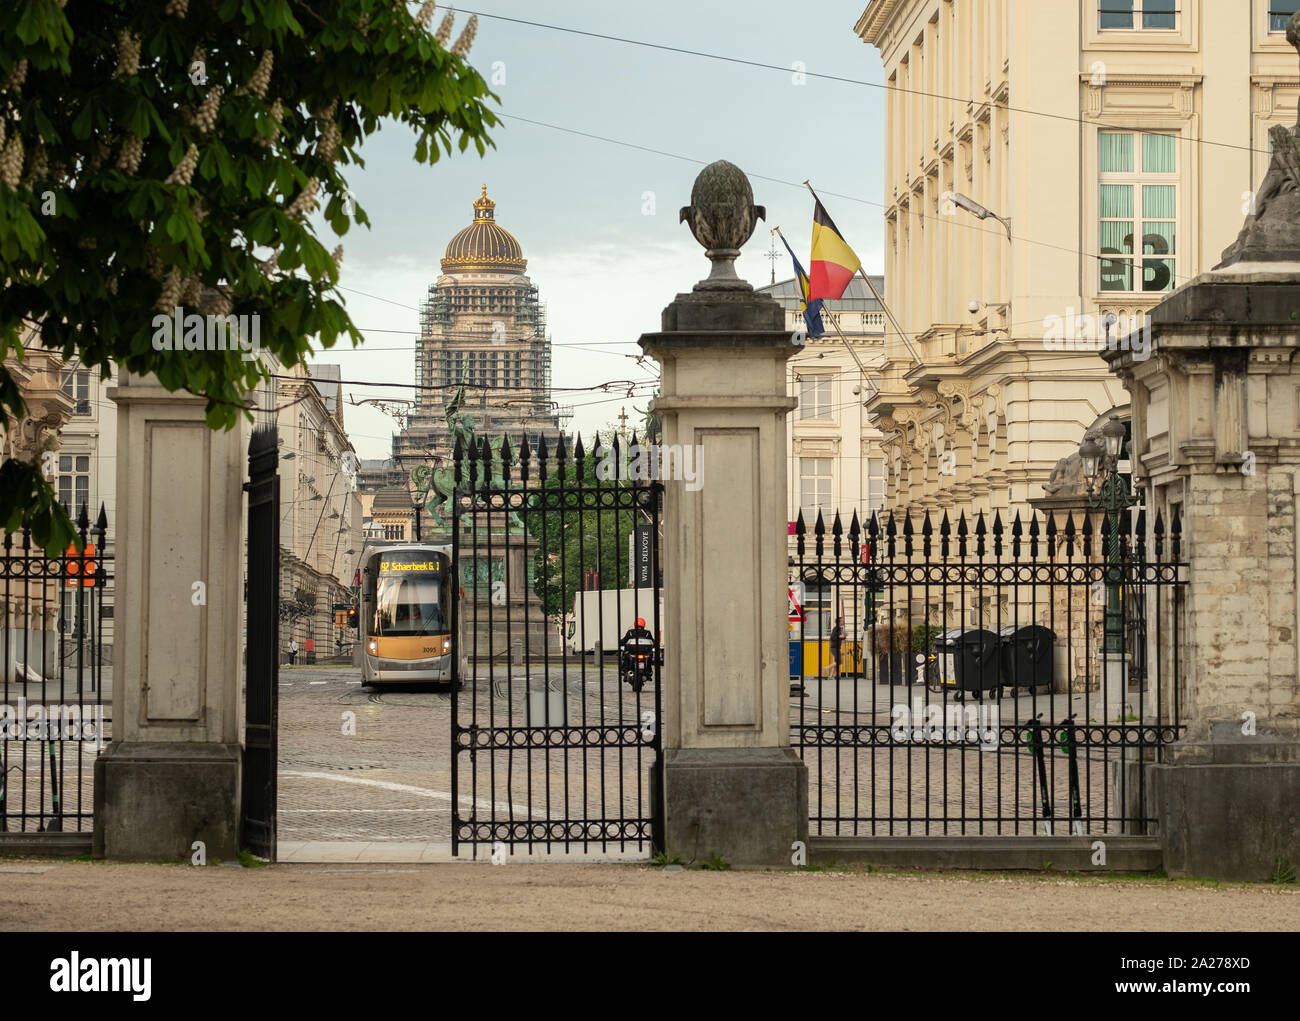 Shot through the gate of Brussels park in historic city centre of passing tram and cars Stock Photo